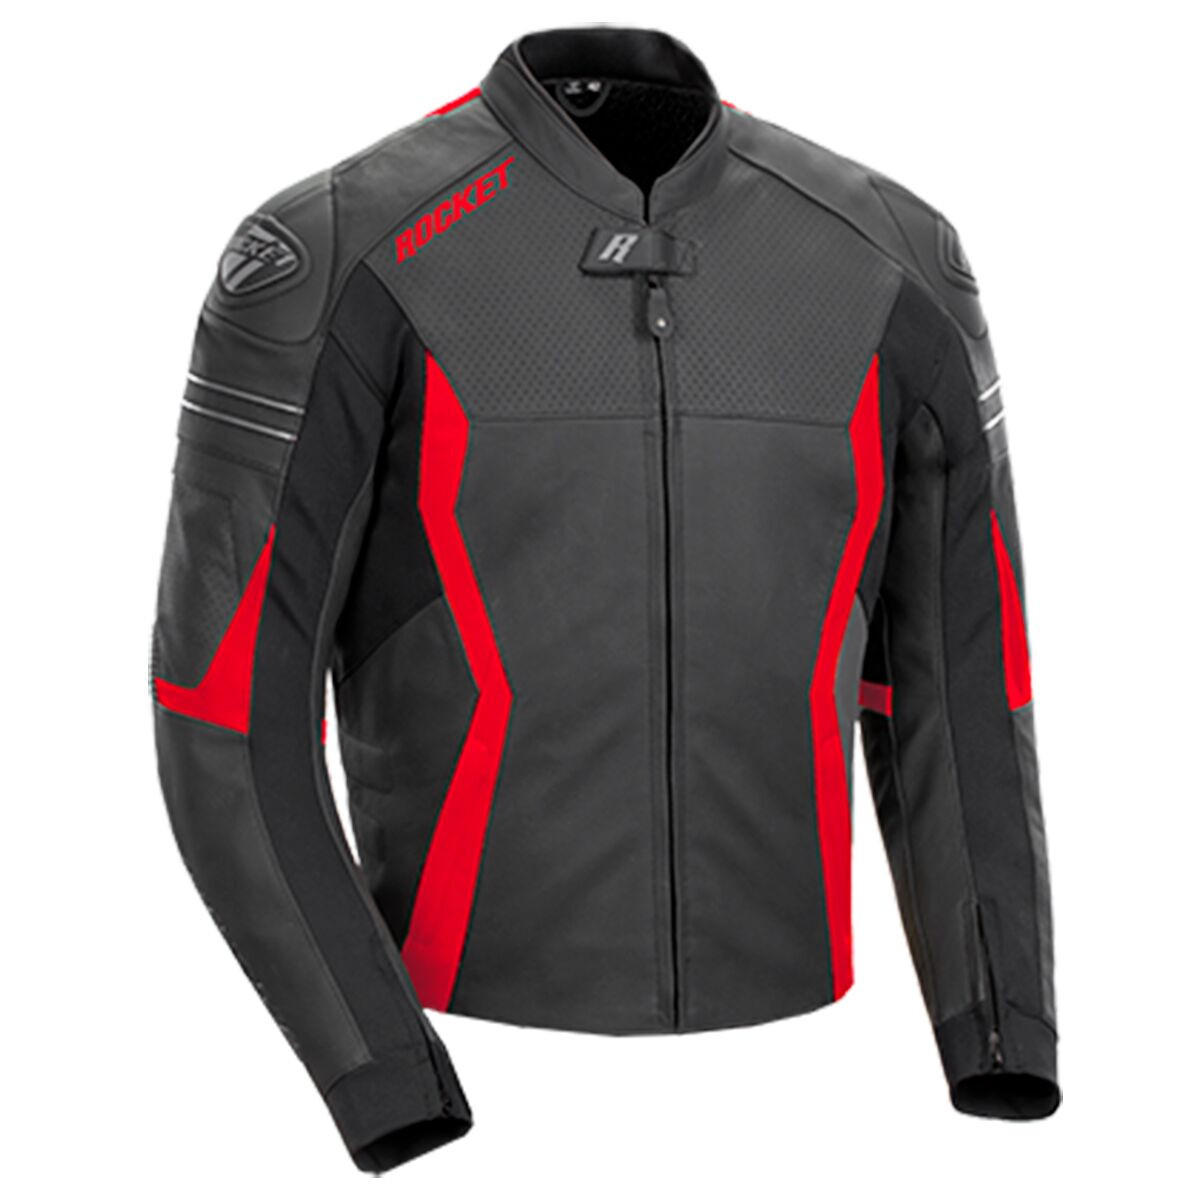 Classic bike leather jacket in black and grey accross chest armoured jacket sale